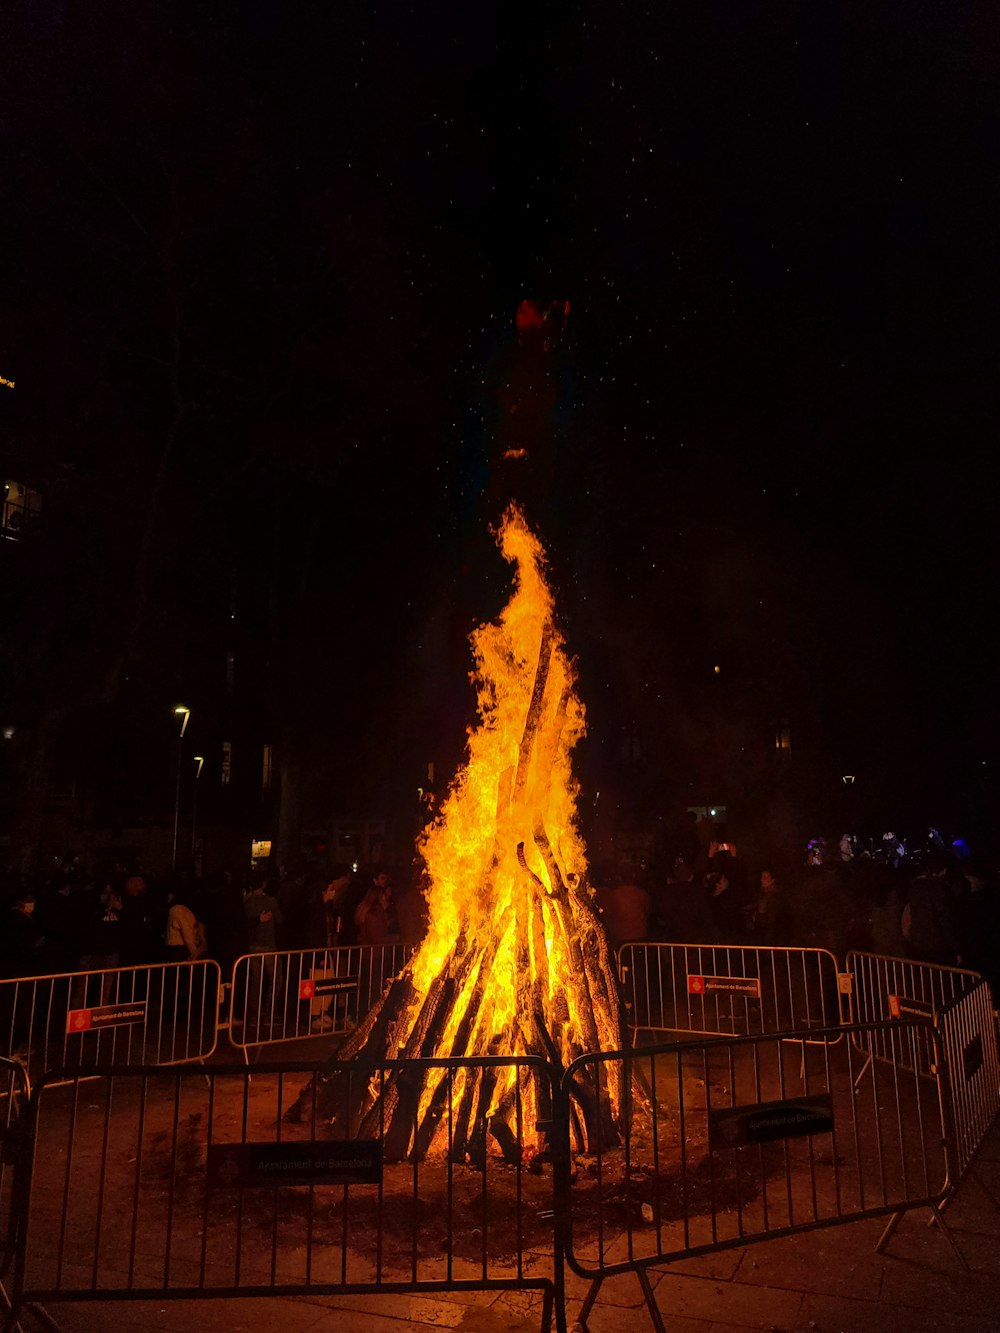 a large bonfire is lit up in the dark